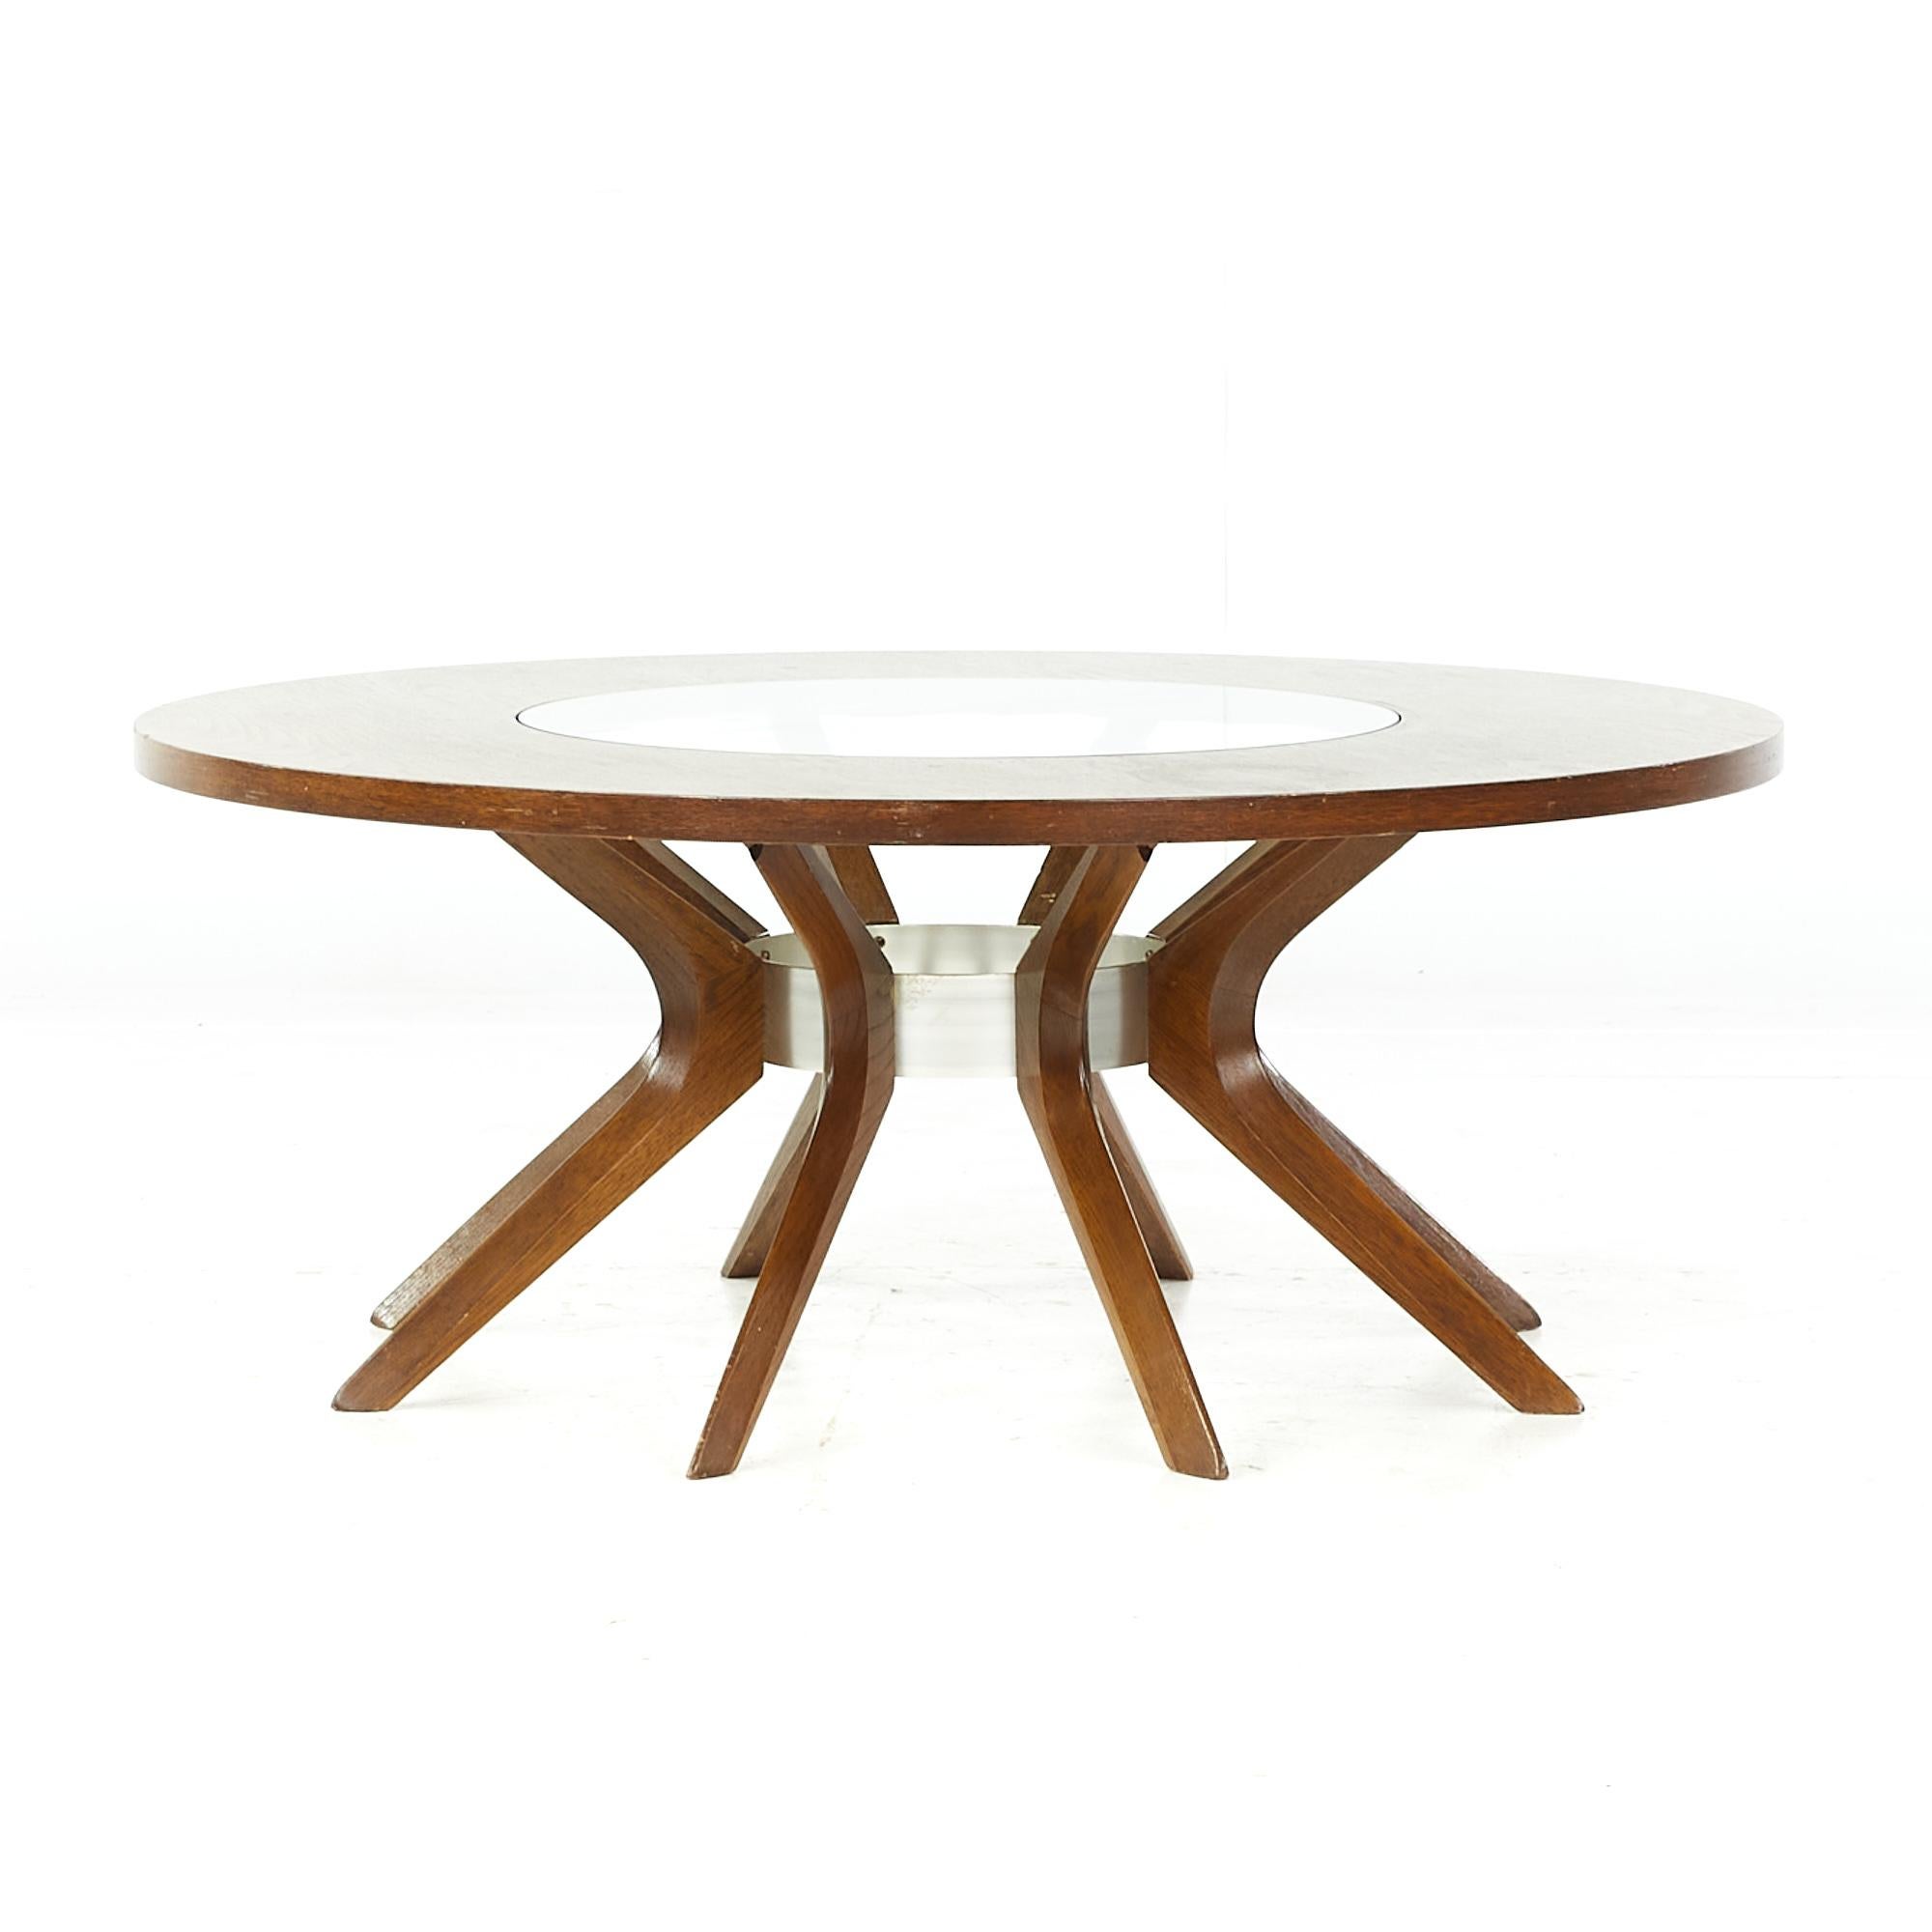 Broyhill Brasilia midcentury walnut cathedral coffee table

This table measures: 40 wide x 40 deep x 16 inches high

All pieces of furniture can be had in what we call restored vintage condition. That means the piece is restored upon purchase so